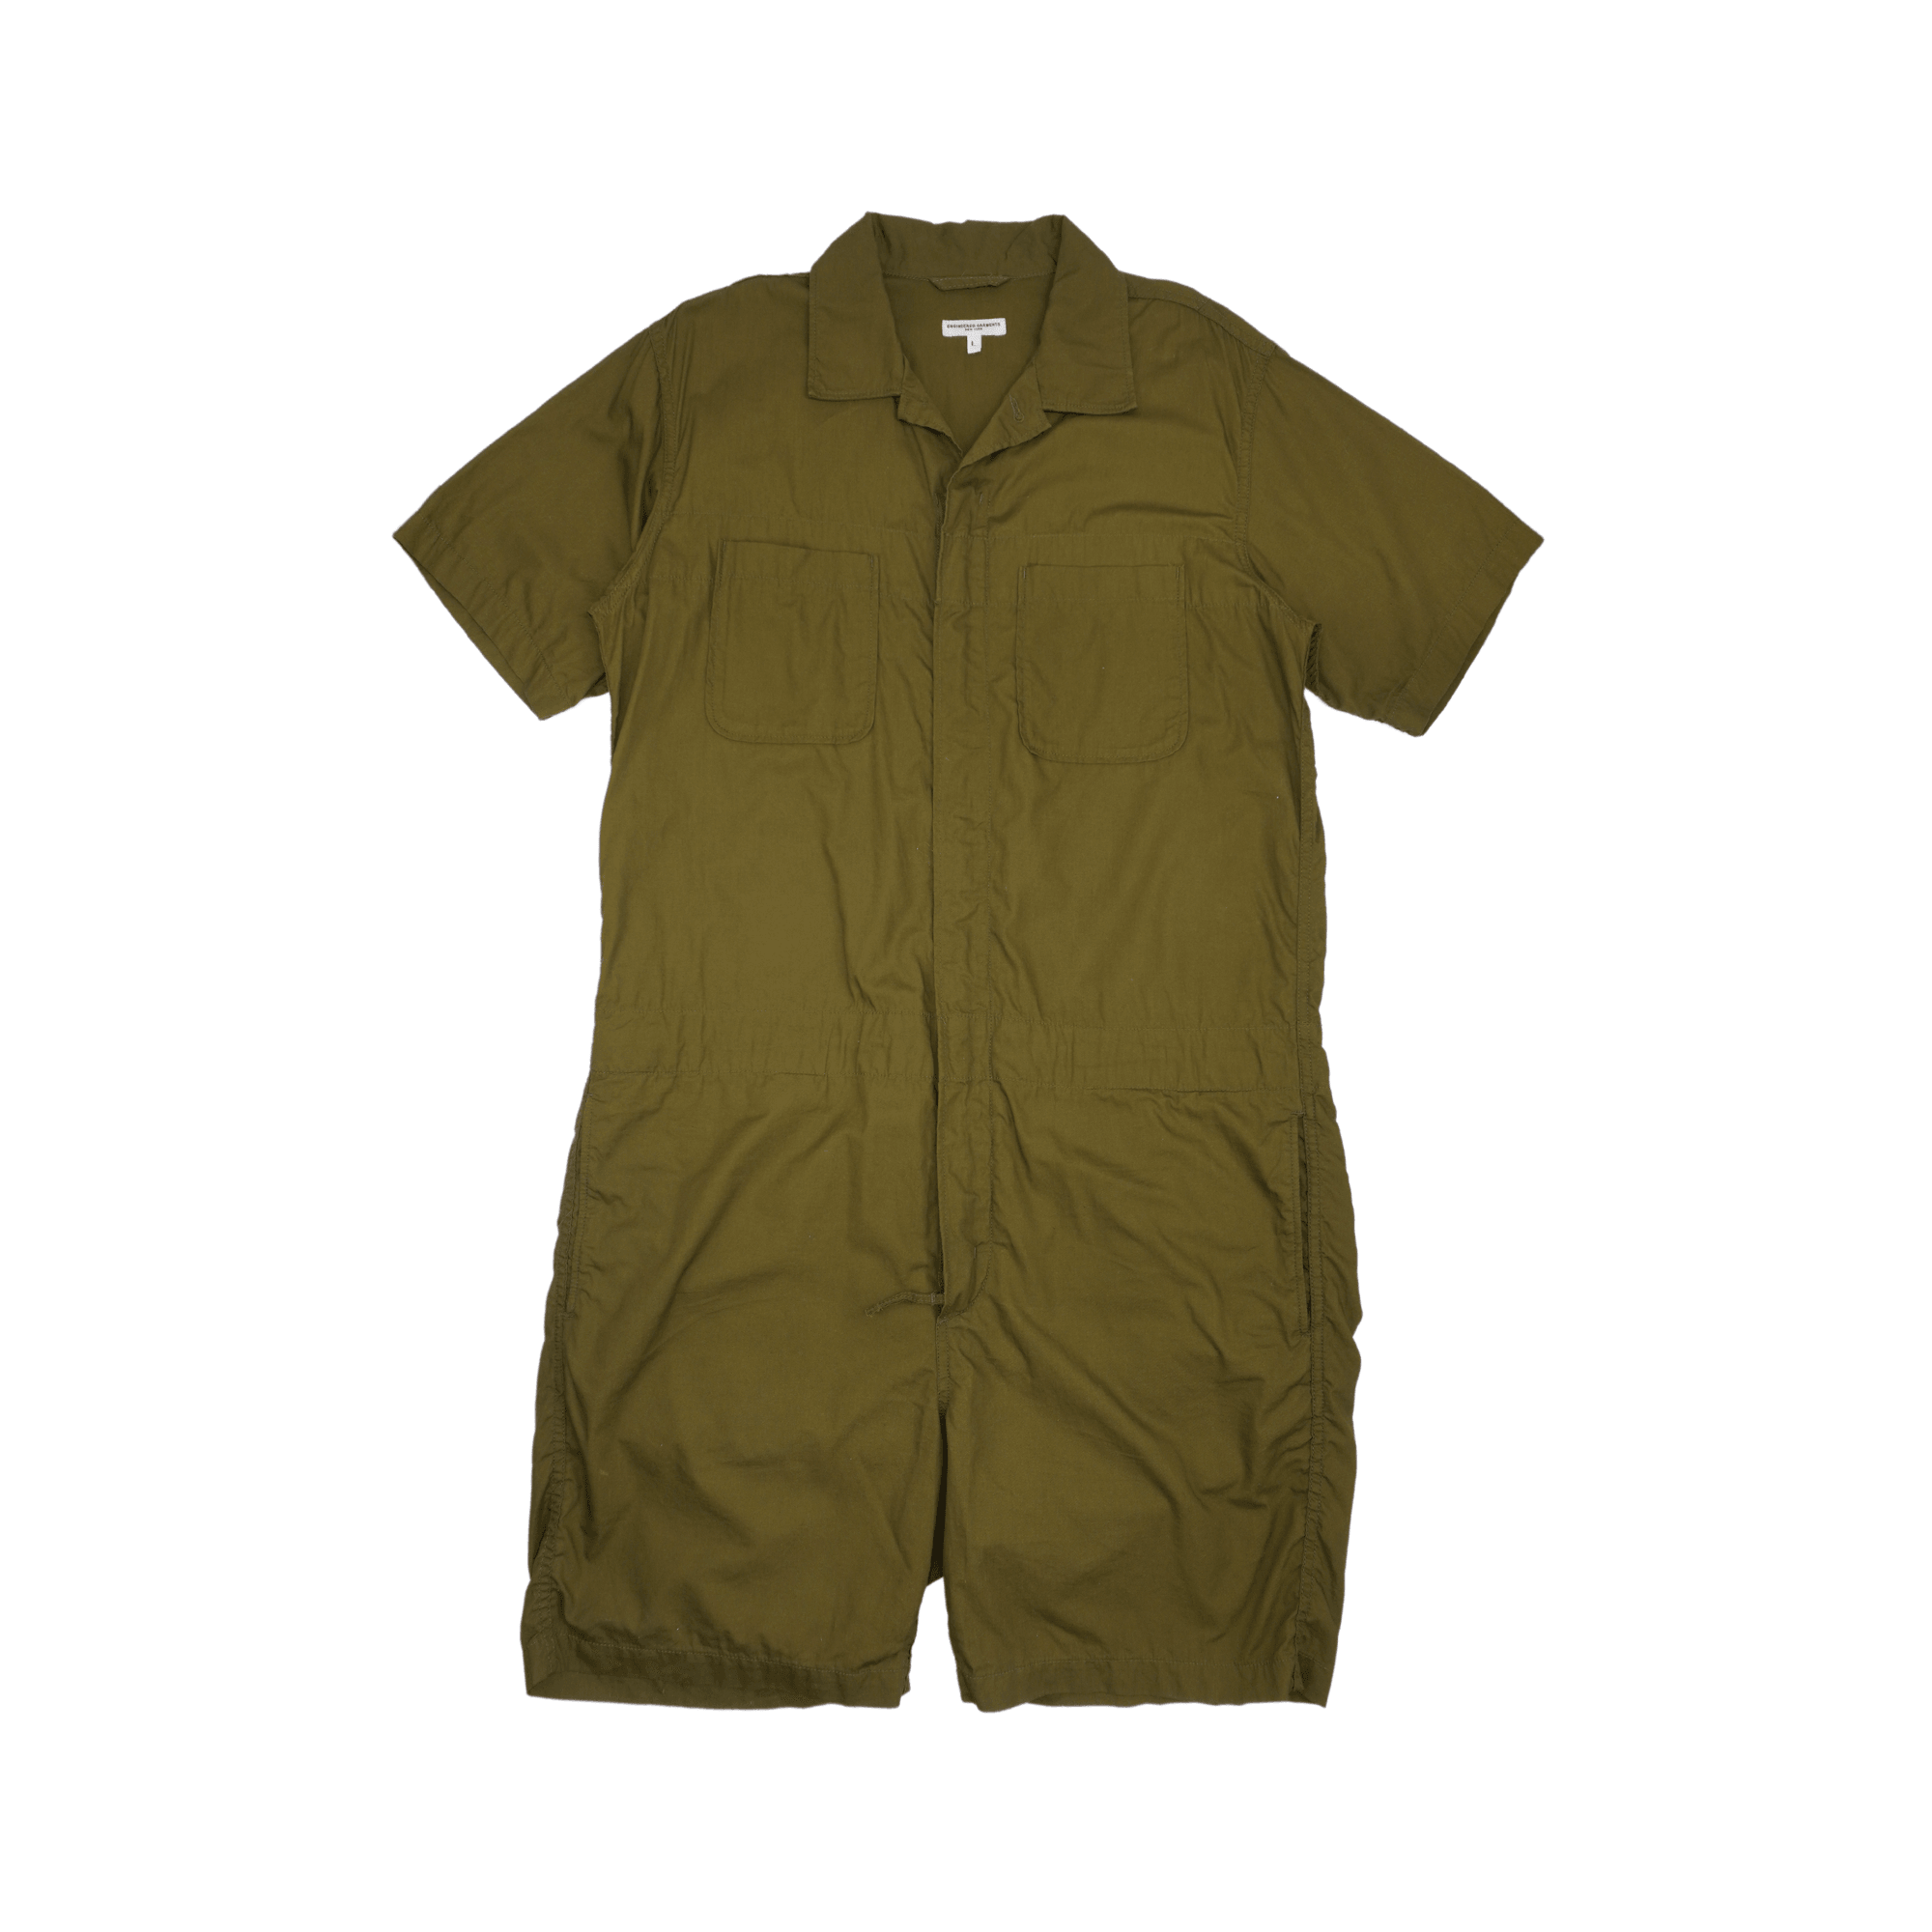 Engineered Garments Jumpsuit - Men's L - Fashionably Yours